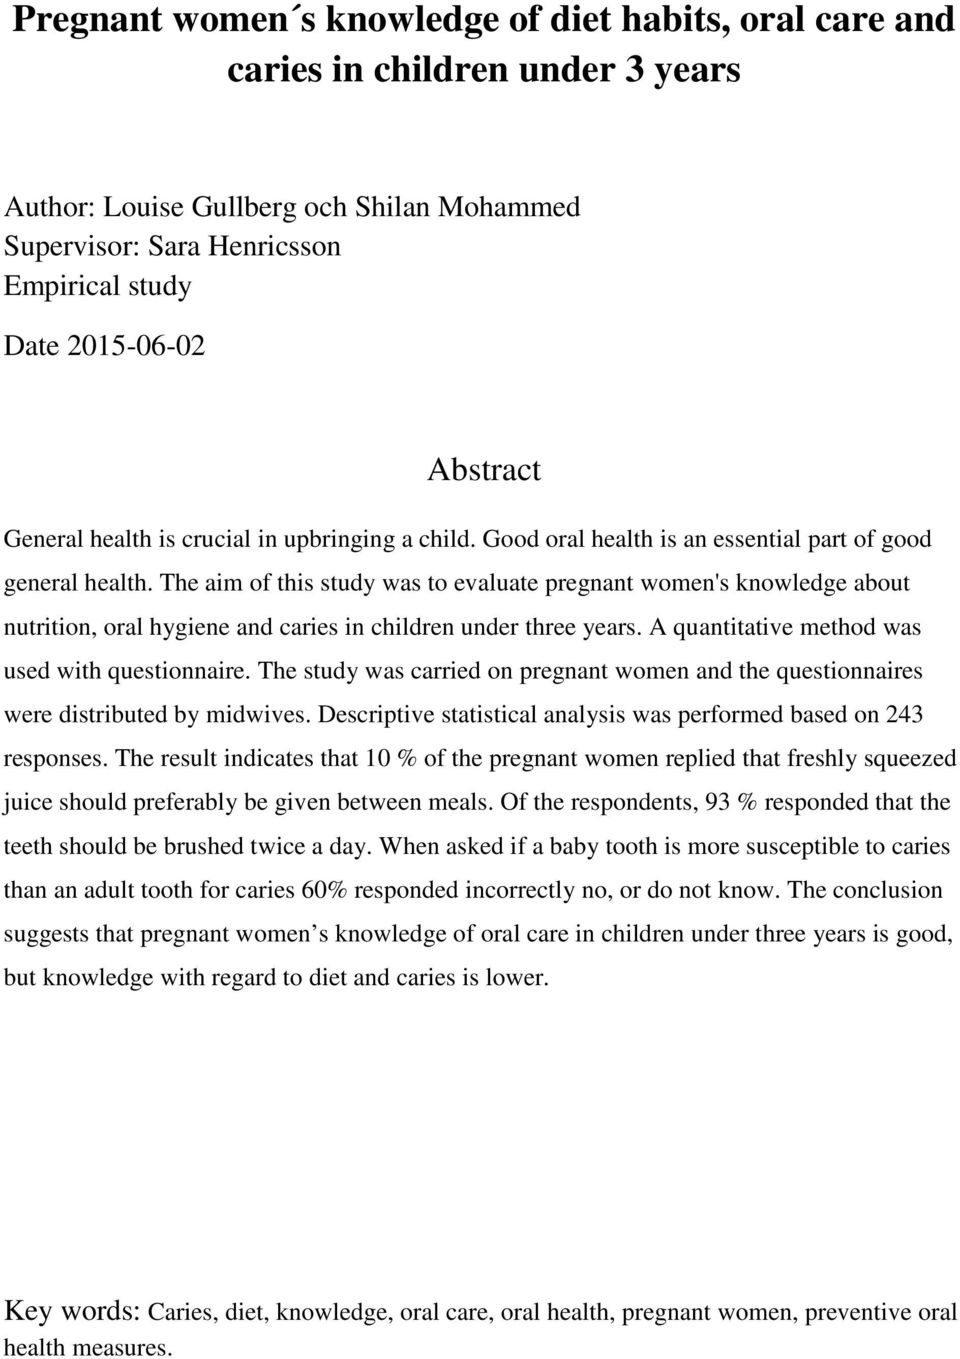 The aim of this study was to evaluate pregnant women's knowledge about nutrition, oral hygiene and caries in children under three years. A quantitative method was used with questionnaire.